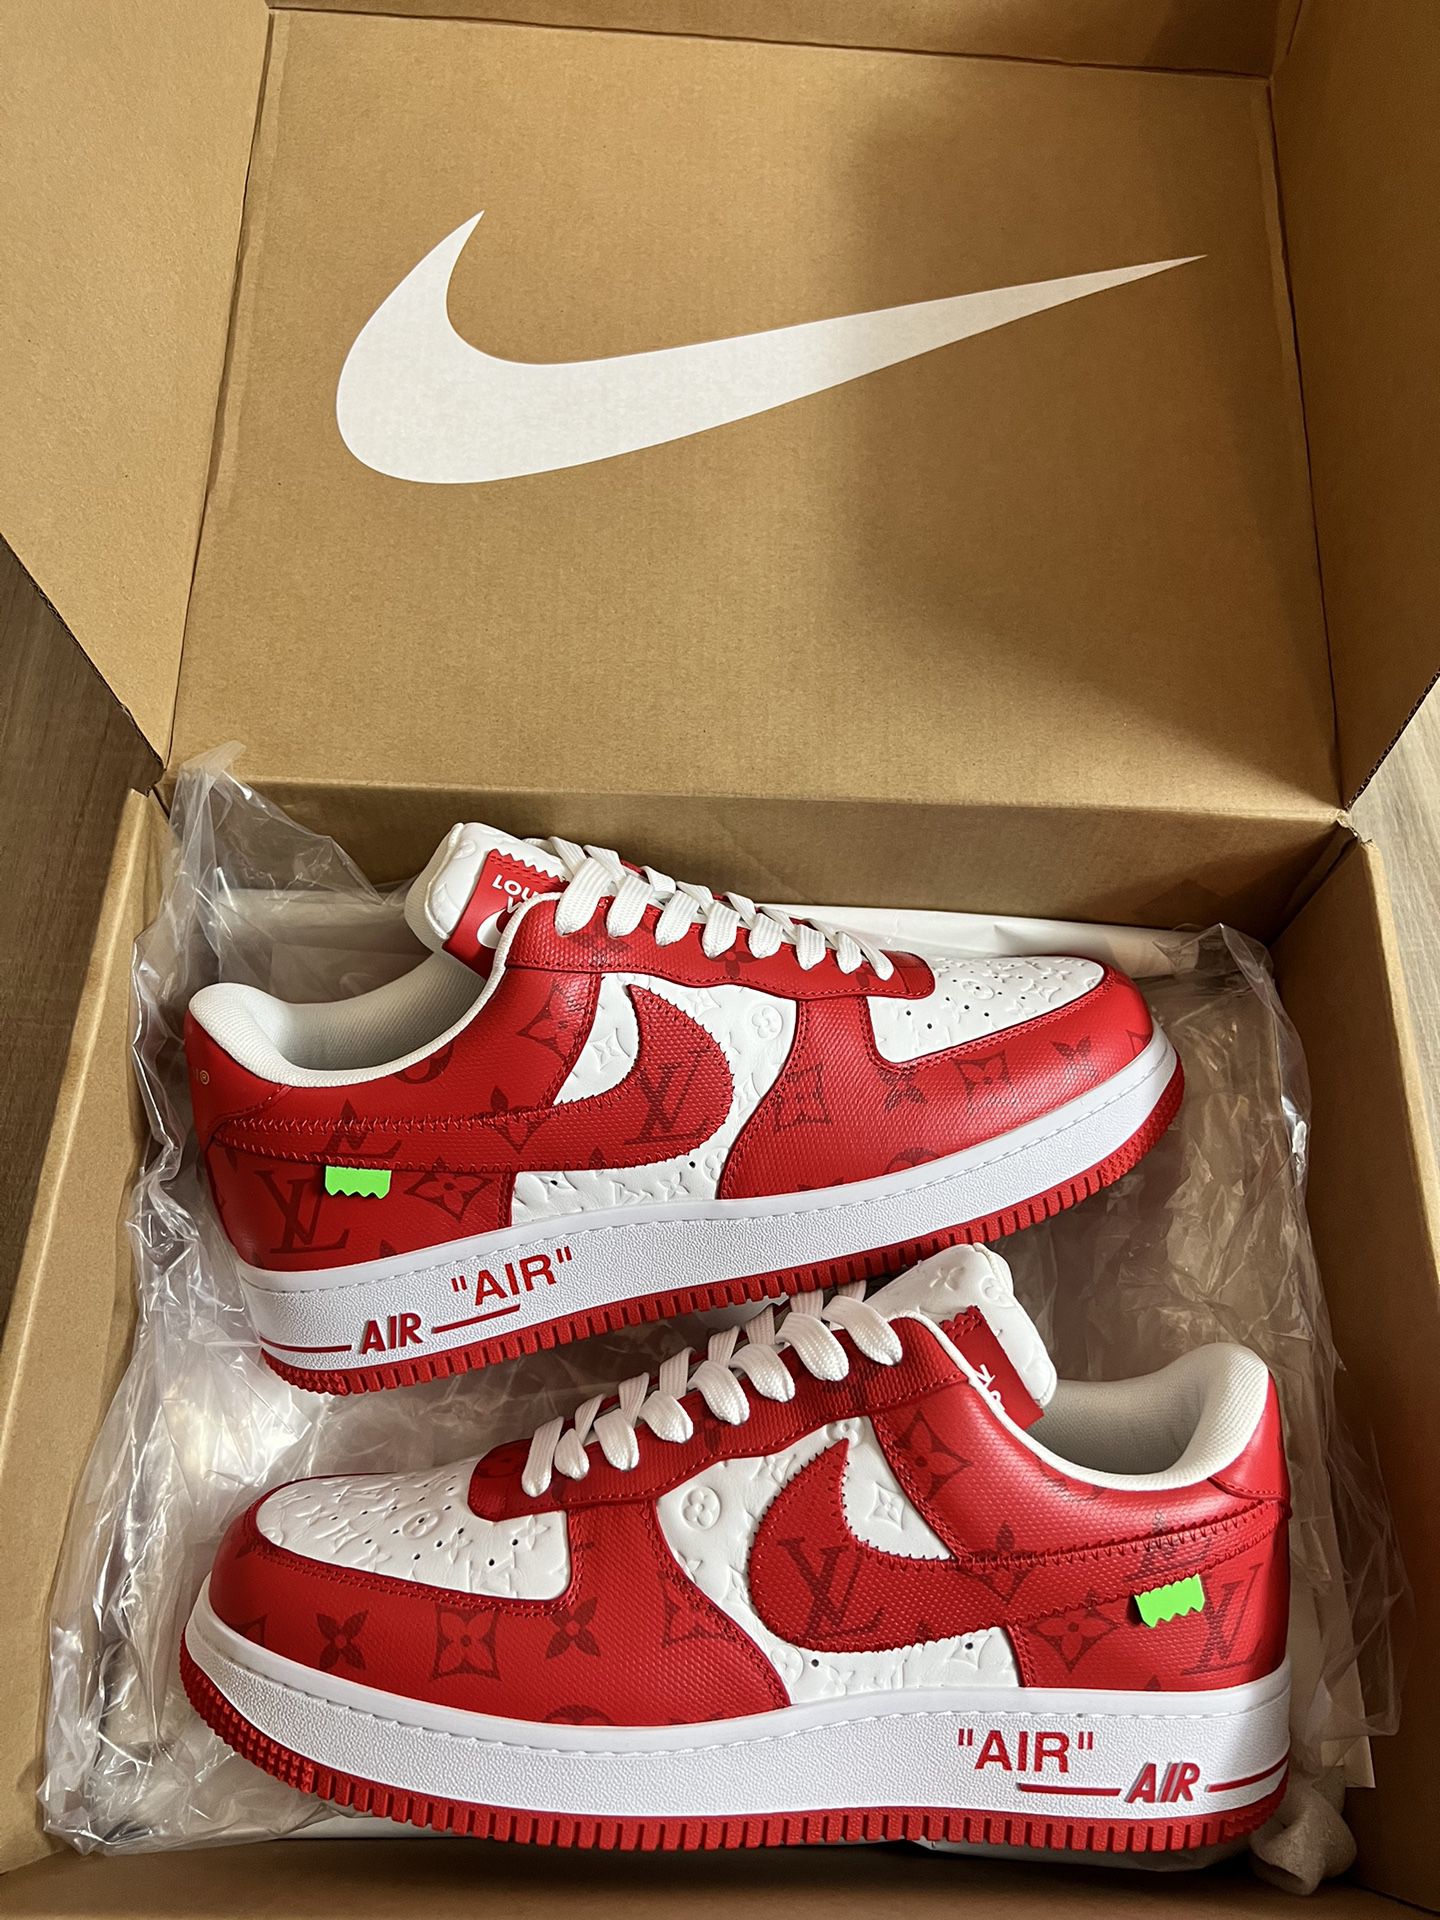 LOUIS VUITTON LV NIKE AIR FORCE 1 LOW AF1 VIRGIL ABLOH WHITE RED NEW SALE SNEAKERS  SHOES BOX MEN SIZE 9.5 43 A4 for Sale in Miami, FL - OfferUp